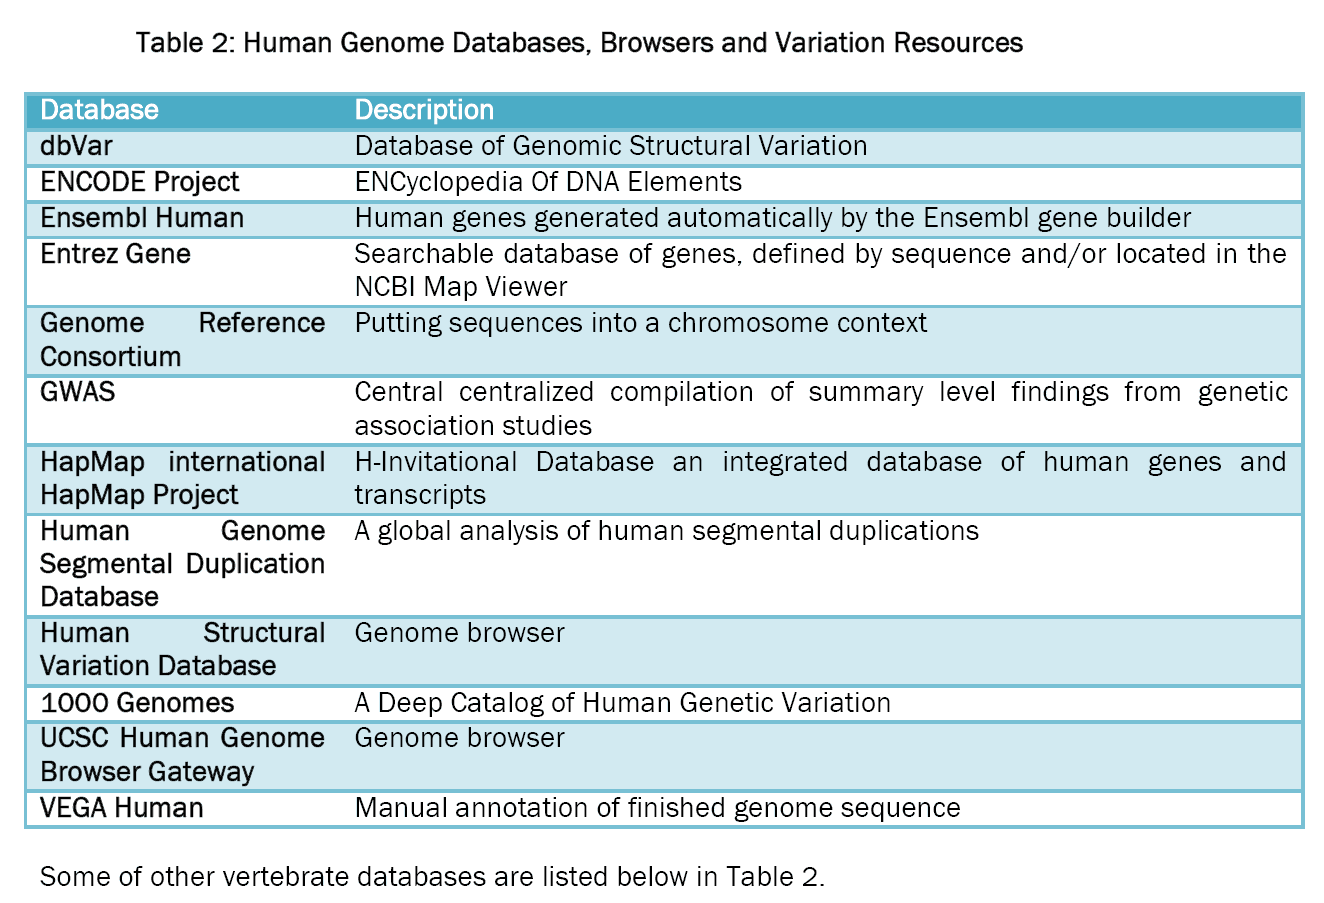 Biology-Human-Genome-Databases-Browsers-Variation-Resources